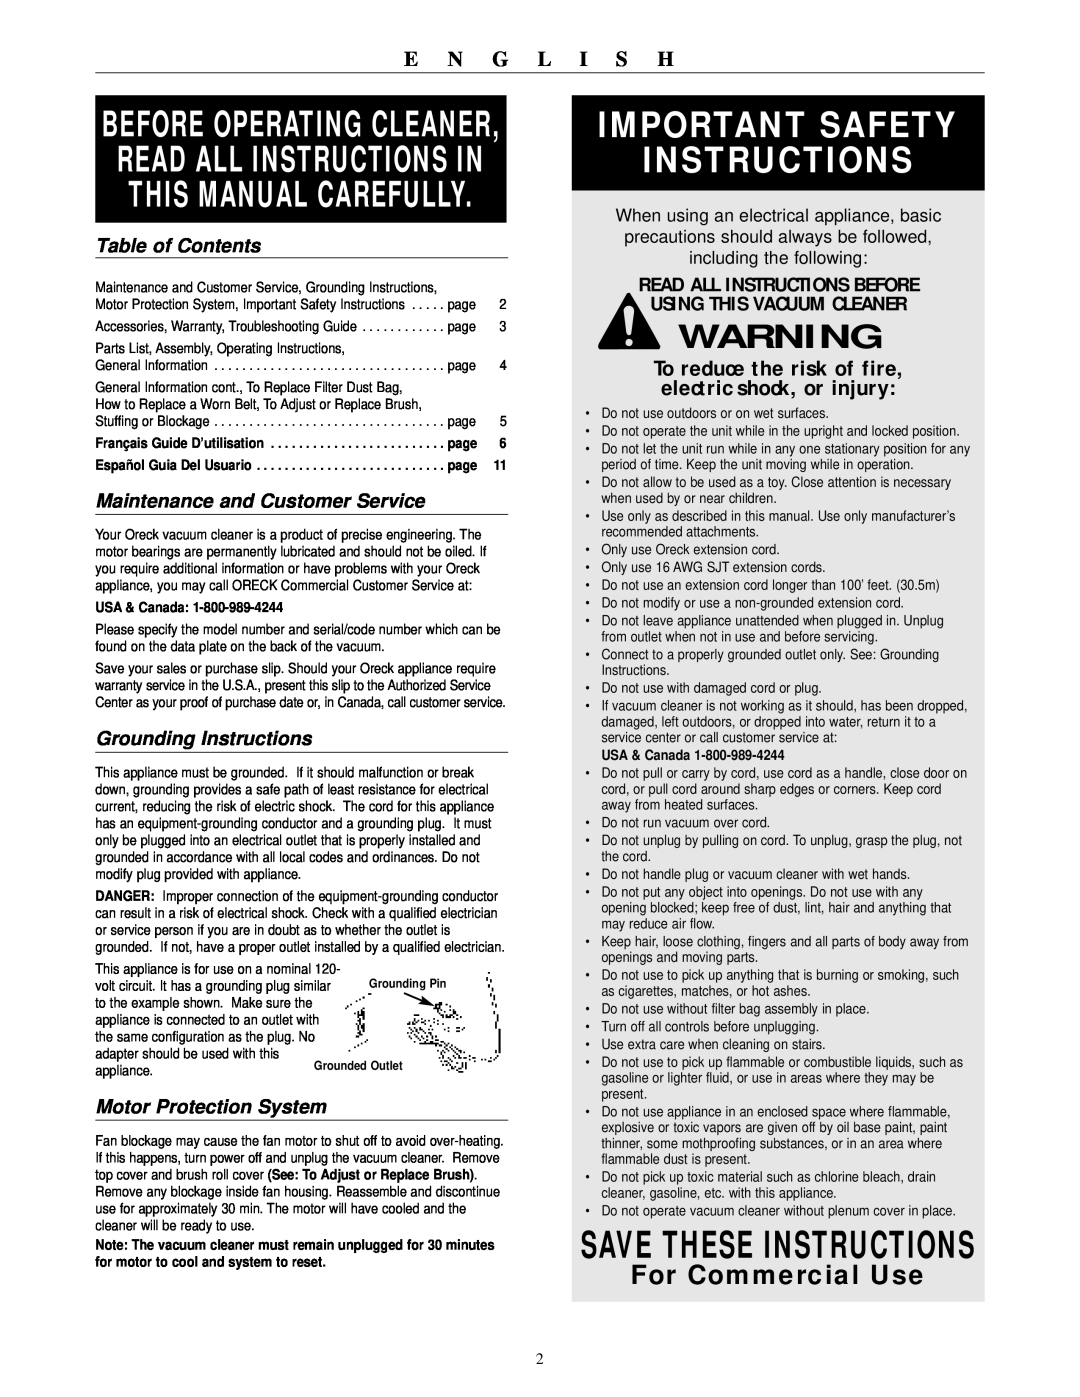 Oreck DS1700HY Important Safety Instructions, For Commercial Use, E N G L I S H, Table of Contents, Grounding Instructions 